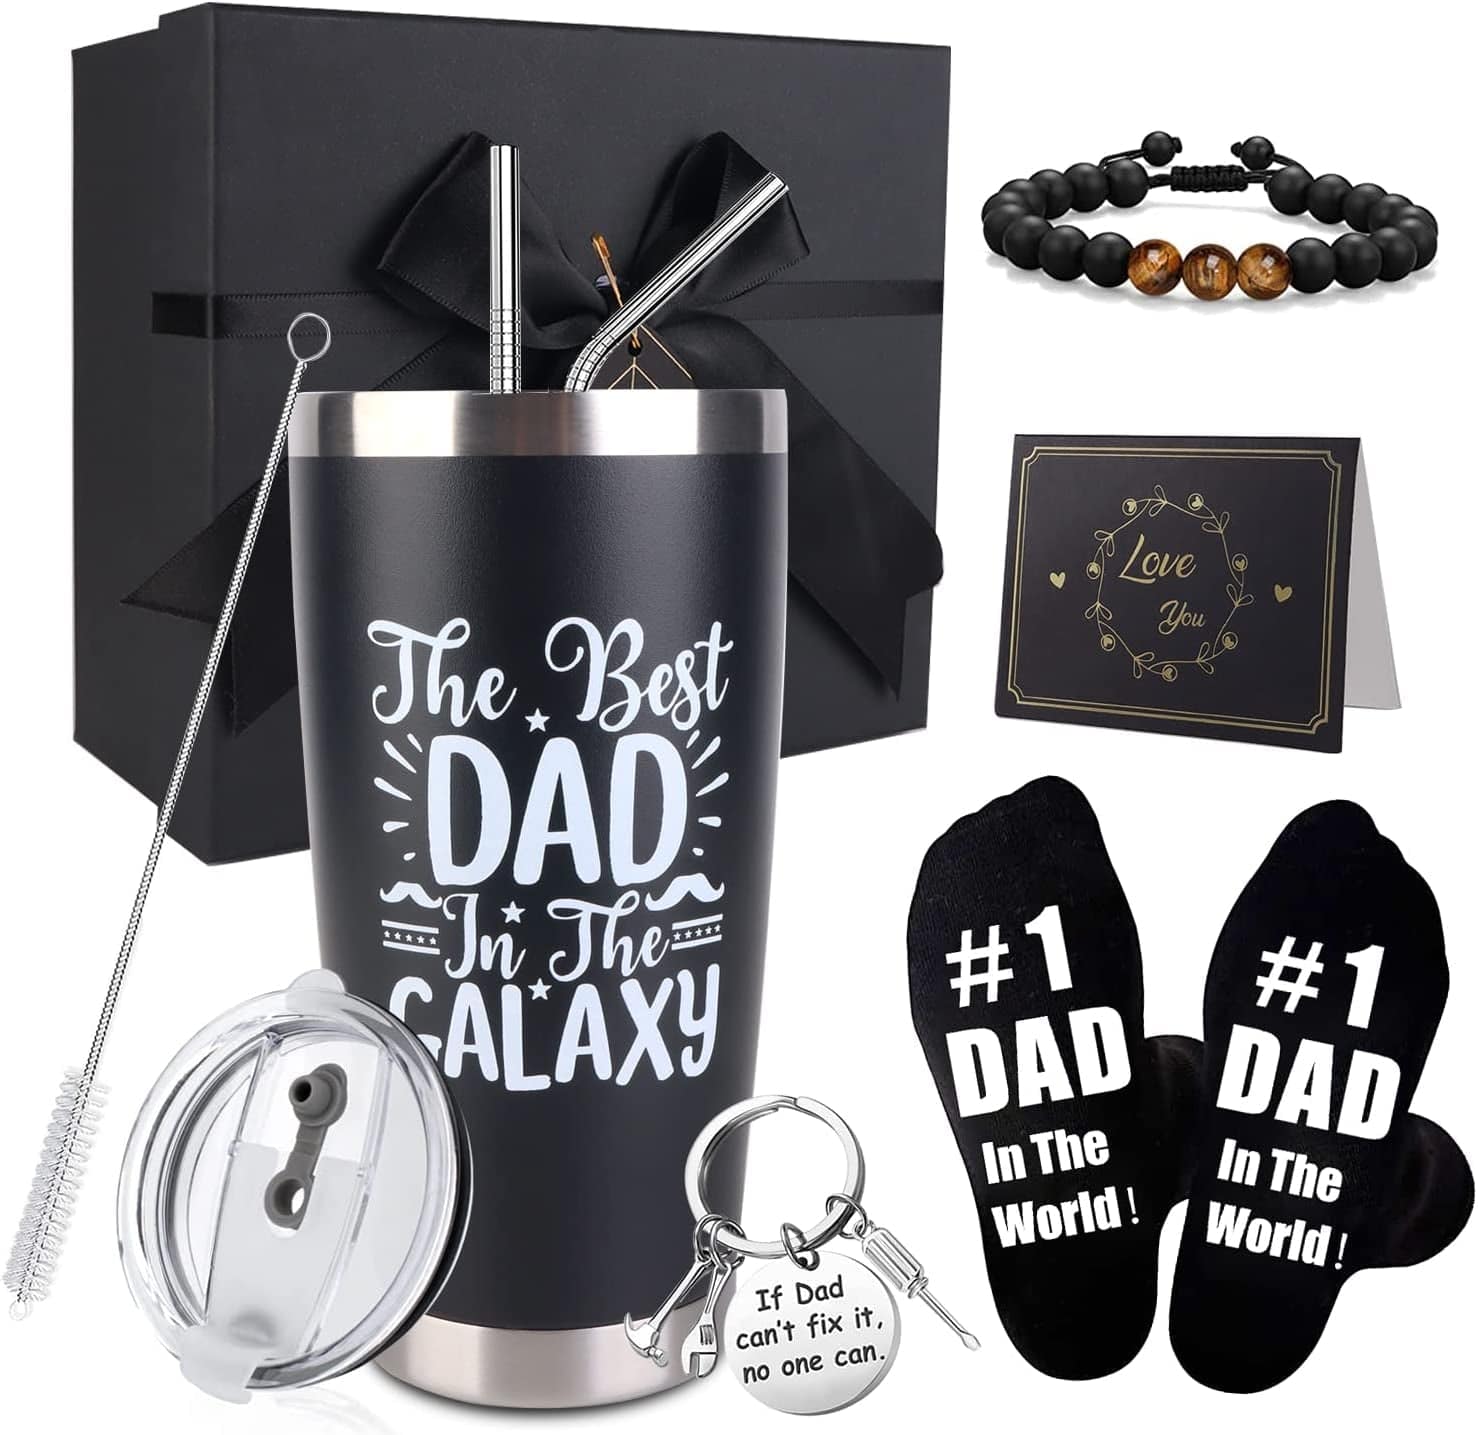 GeckoCustom Dad Gifts, 8PCS Fathers Day Gift Includes 20Oz Tumbler with Lid Straw Brush Socks Bracelet Key Chain Thanks Card Gift Box, Best Dad Ever Gifts from Daughter Son Kids for Christmas Birthday Faththers Day